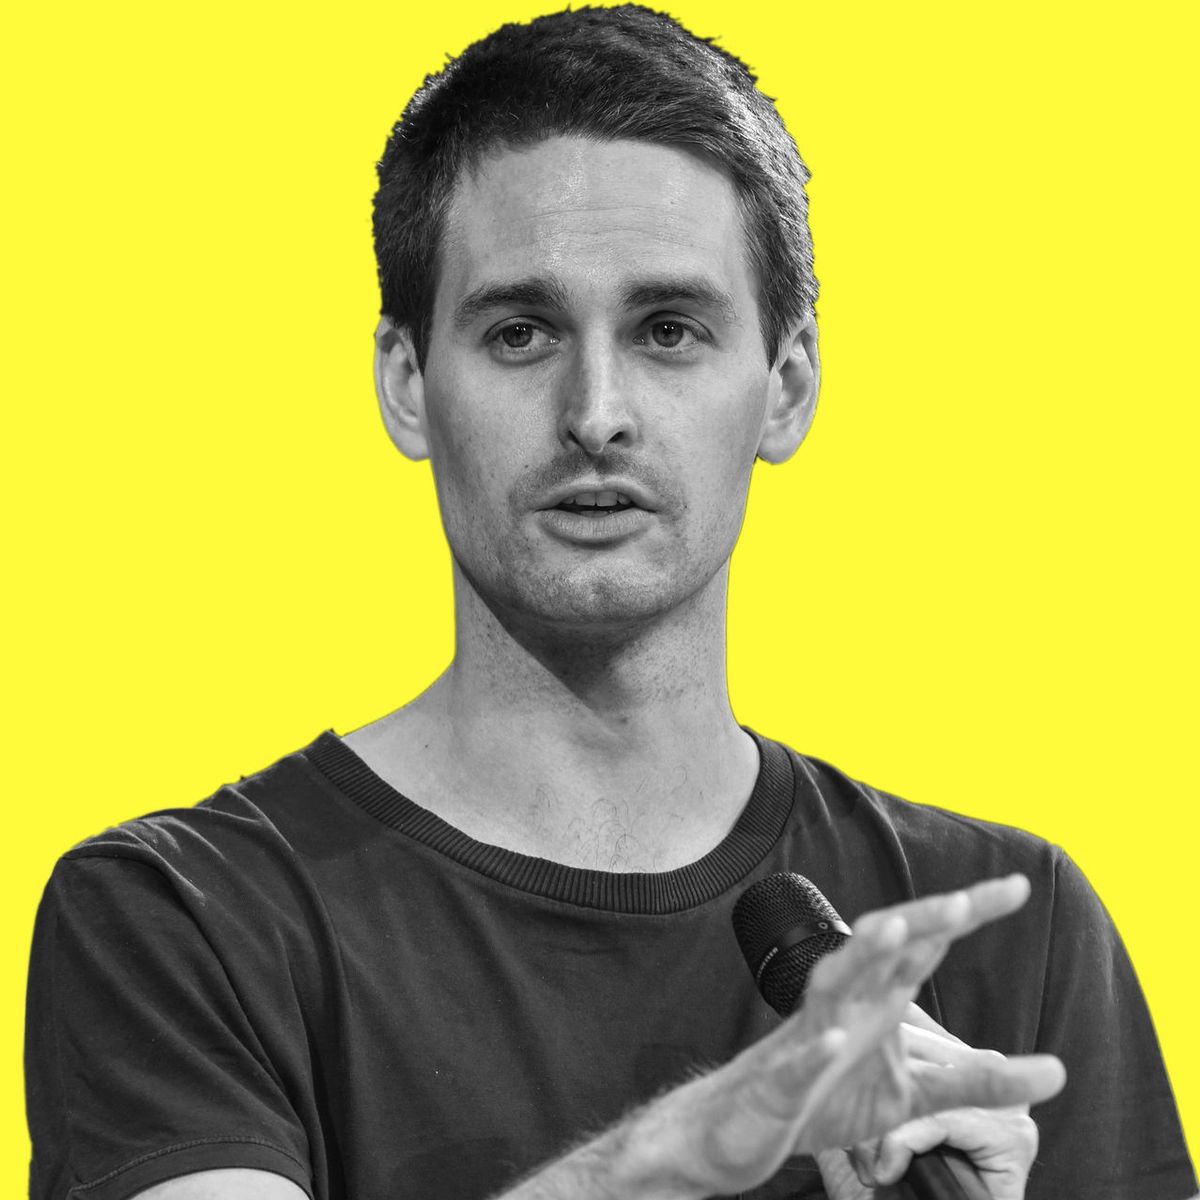 After tremendous growth in India, the CEO of popular social media platform, Snapchat, has decided to enhance the company's ca